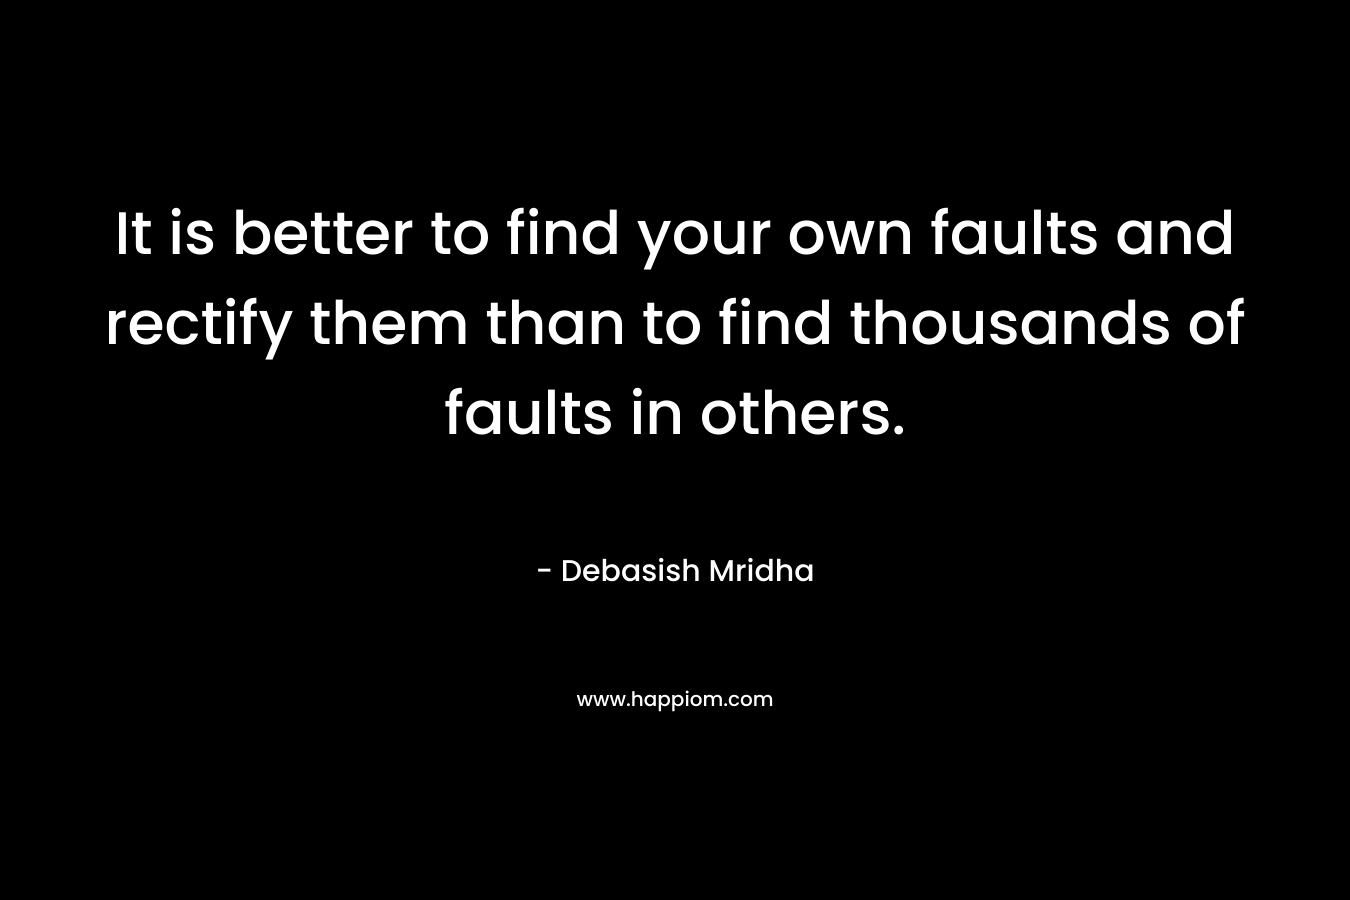 It is better to find your own faults and rectify them than to find thousands of faults in others.